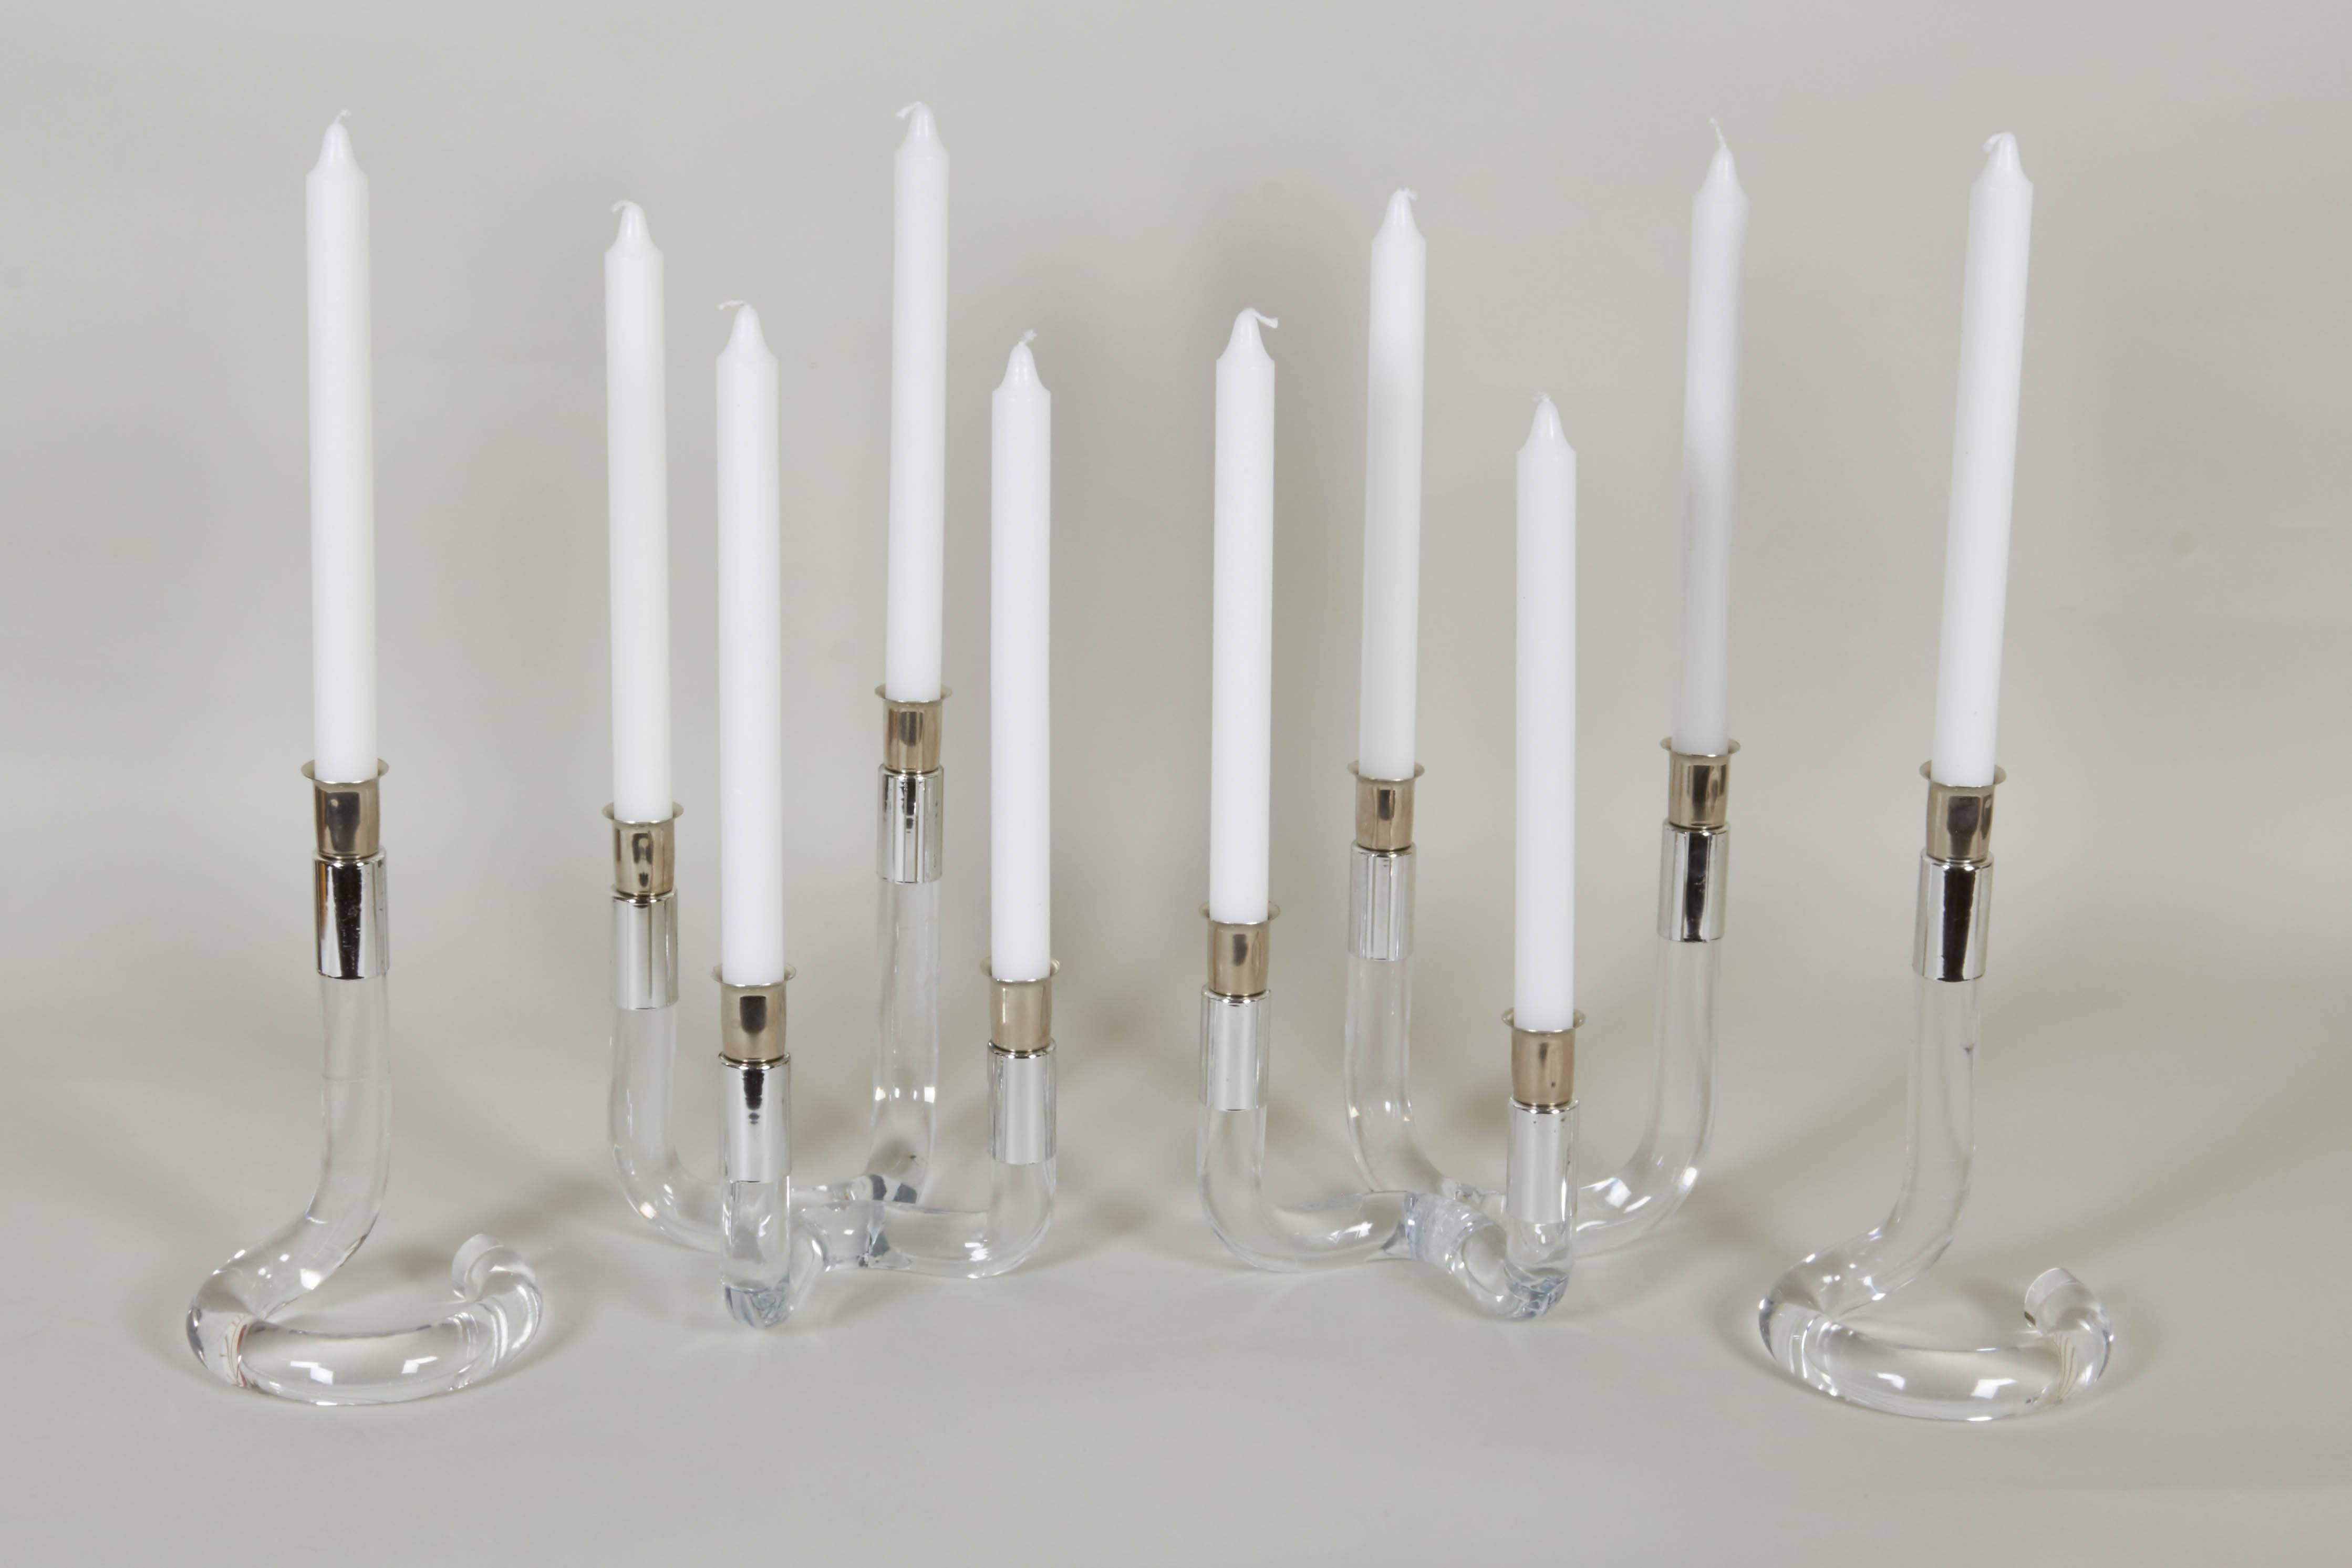 A set of four Mid-Century Modern candleholders, two single-light and two four-light, produced circa 1960s-1970s, styled in the manner of Dorothy Thorpe, each with chrome bobeches on curvaceous clear Lucite stems. Excellent vintage condition,